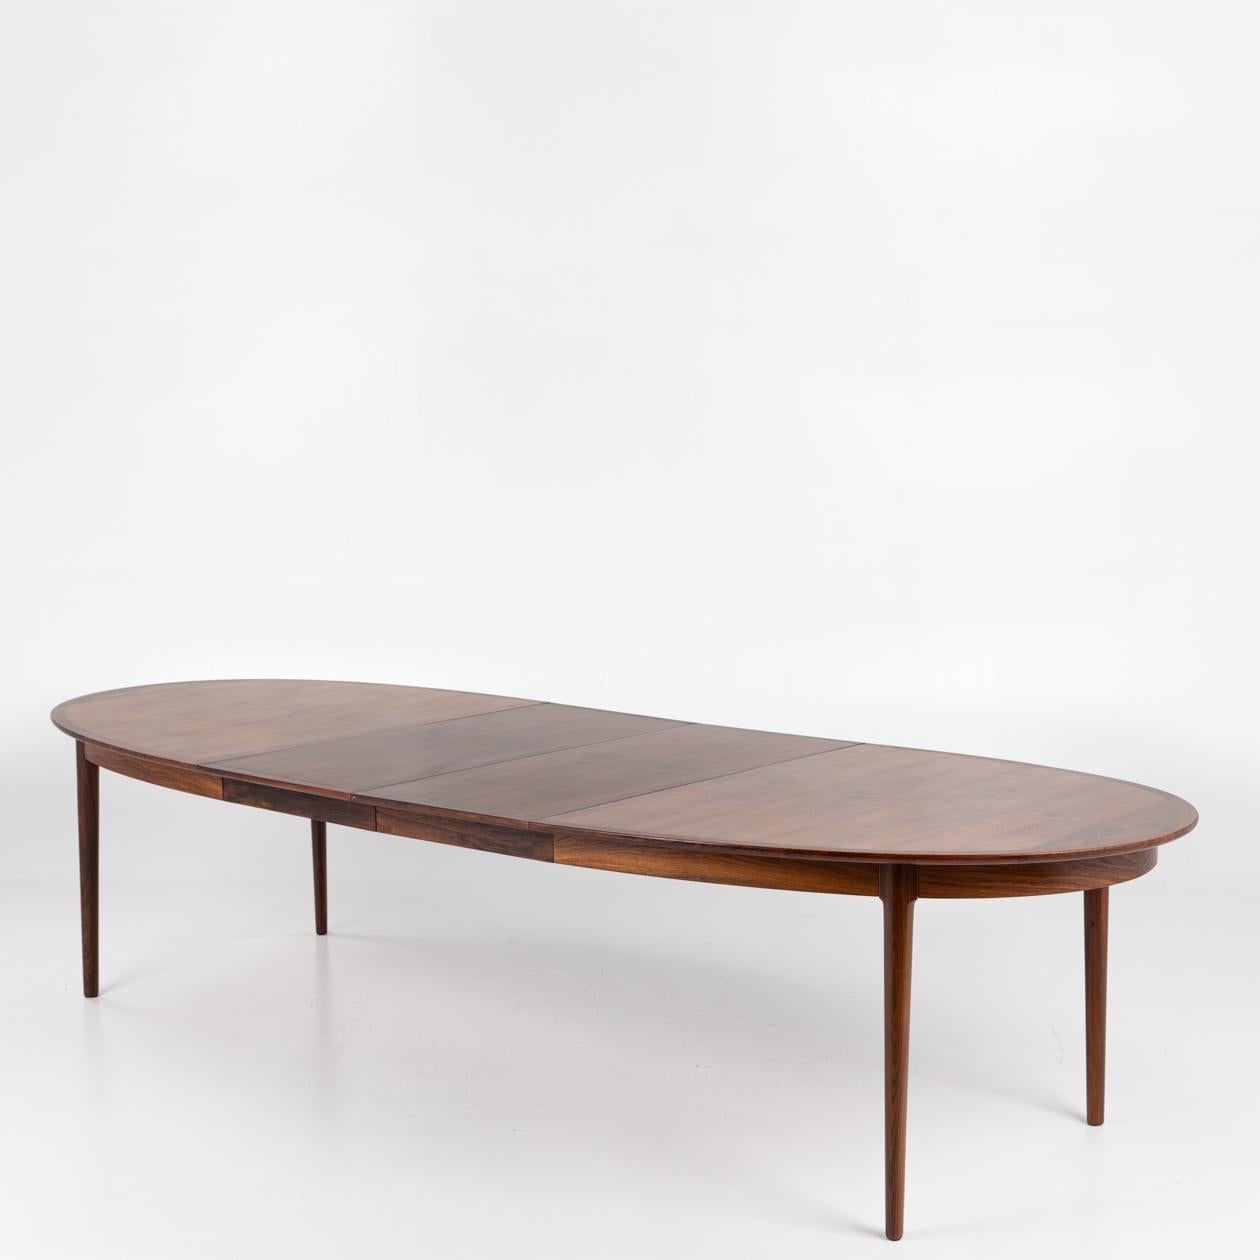 20th Century Oval rosewood dining table by Torbjørn Afdal